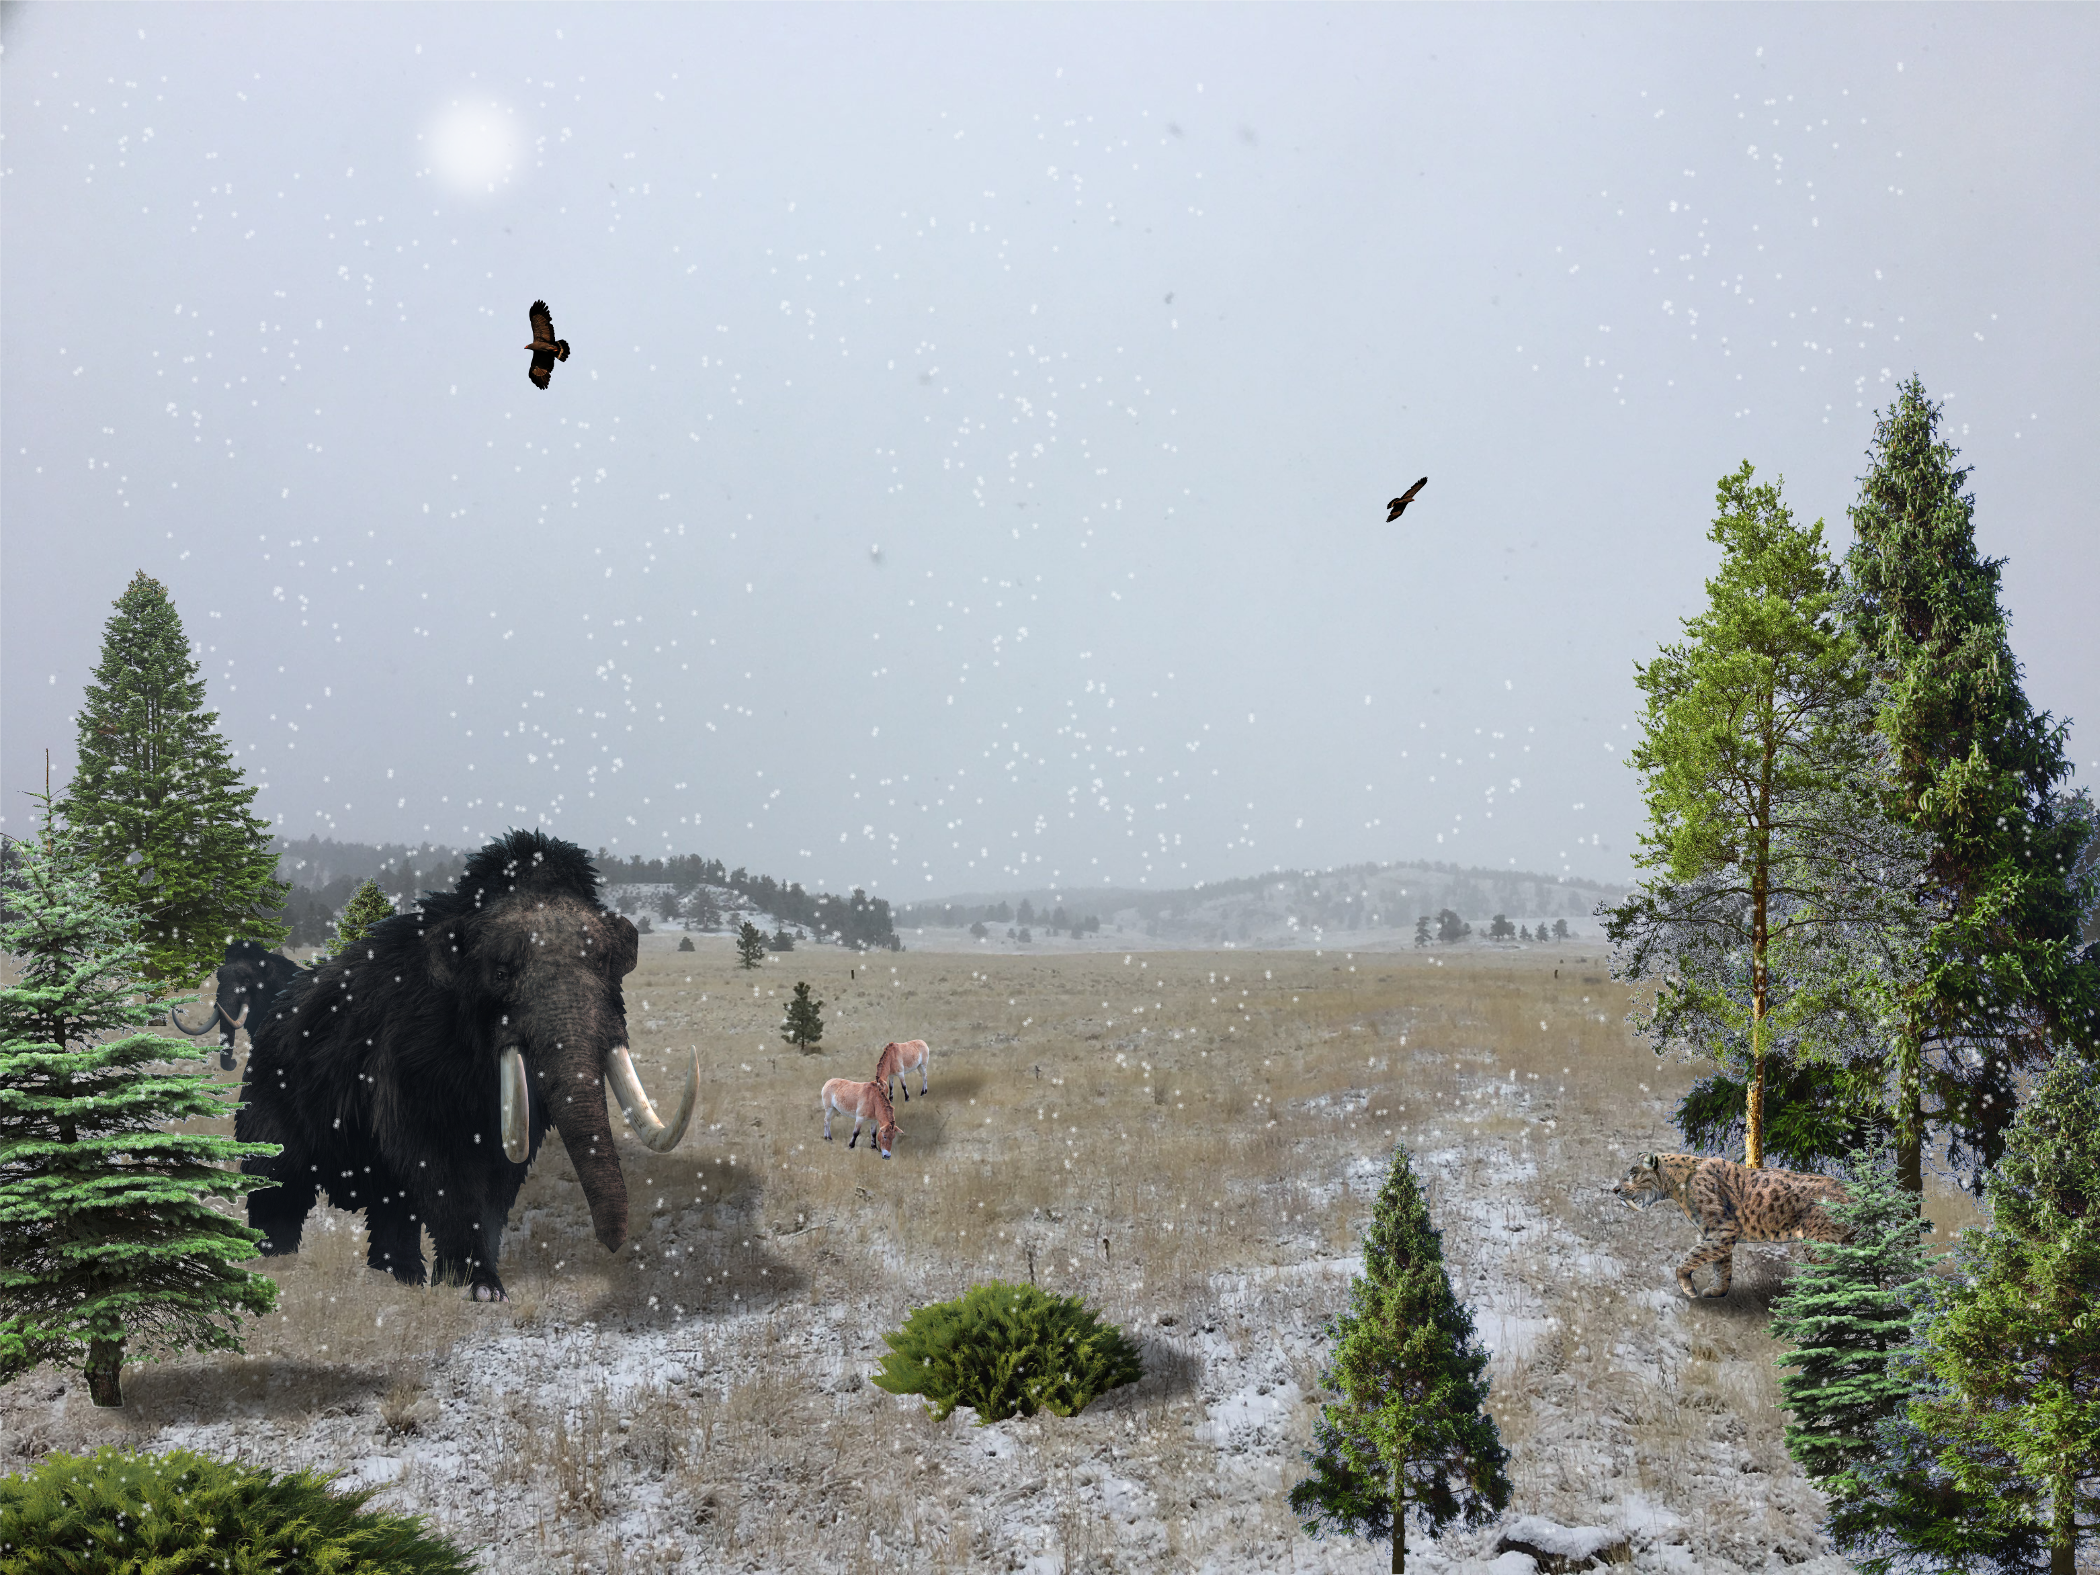 A constructed image of what the monument might have looked like in the Pleistocene with a mammoth and other ice age animals on a snowy field.